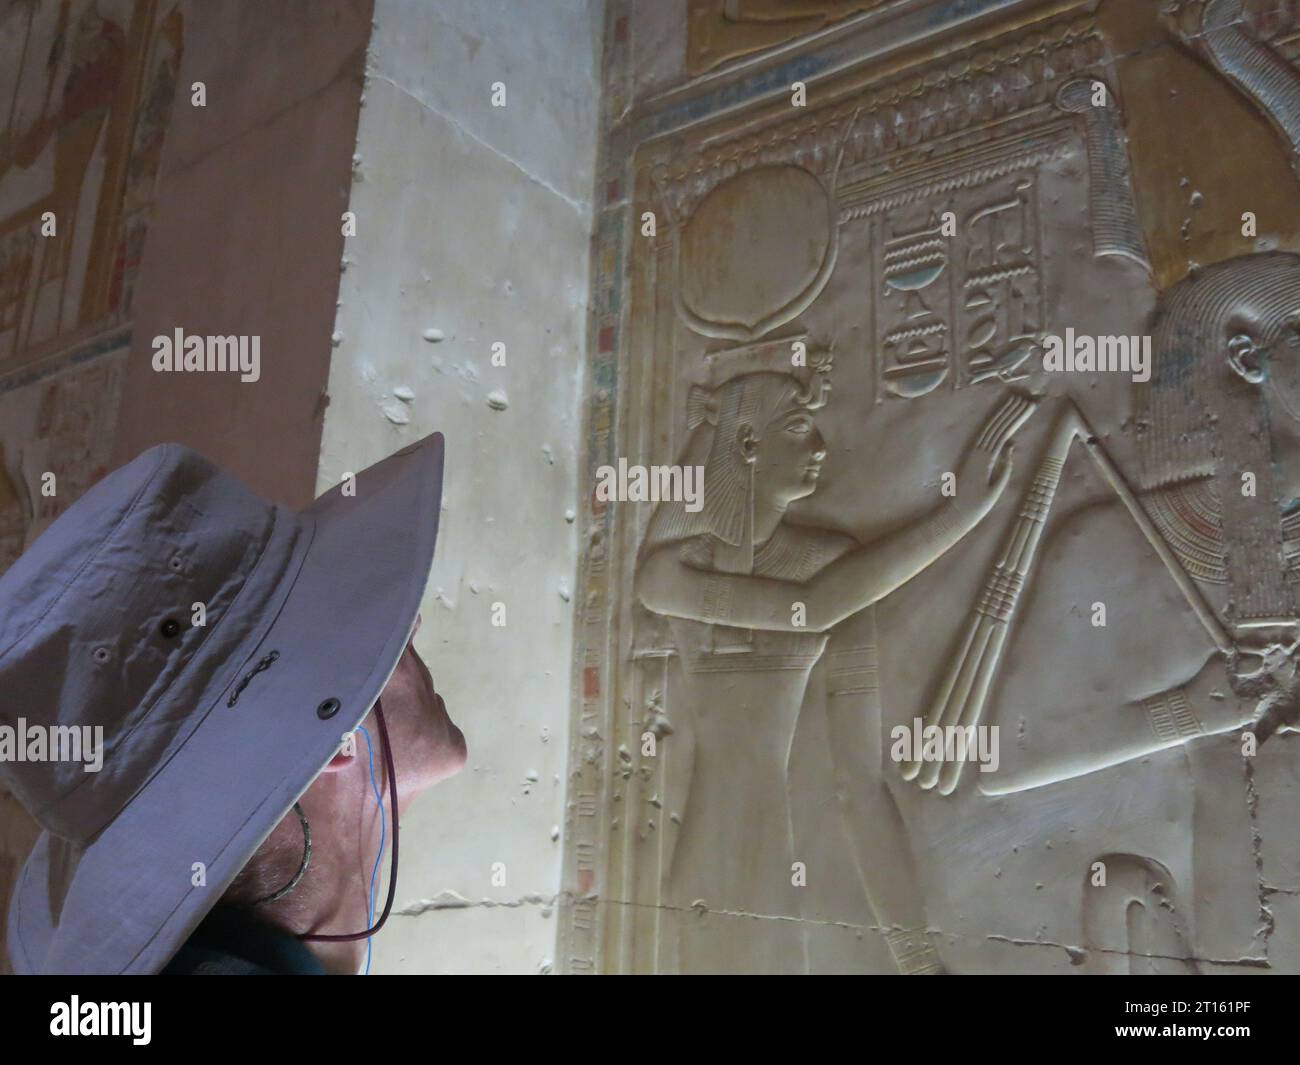 English male tourist in wide hat gazes up at the carvings on the wall at the Great Temple of Seti I at Abydos, historical necropolis of Ancient Egypt. Stock Photo